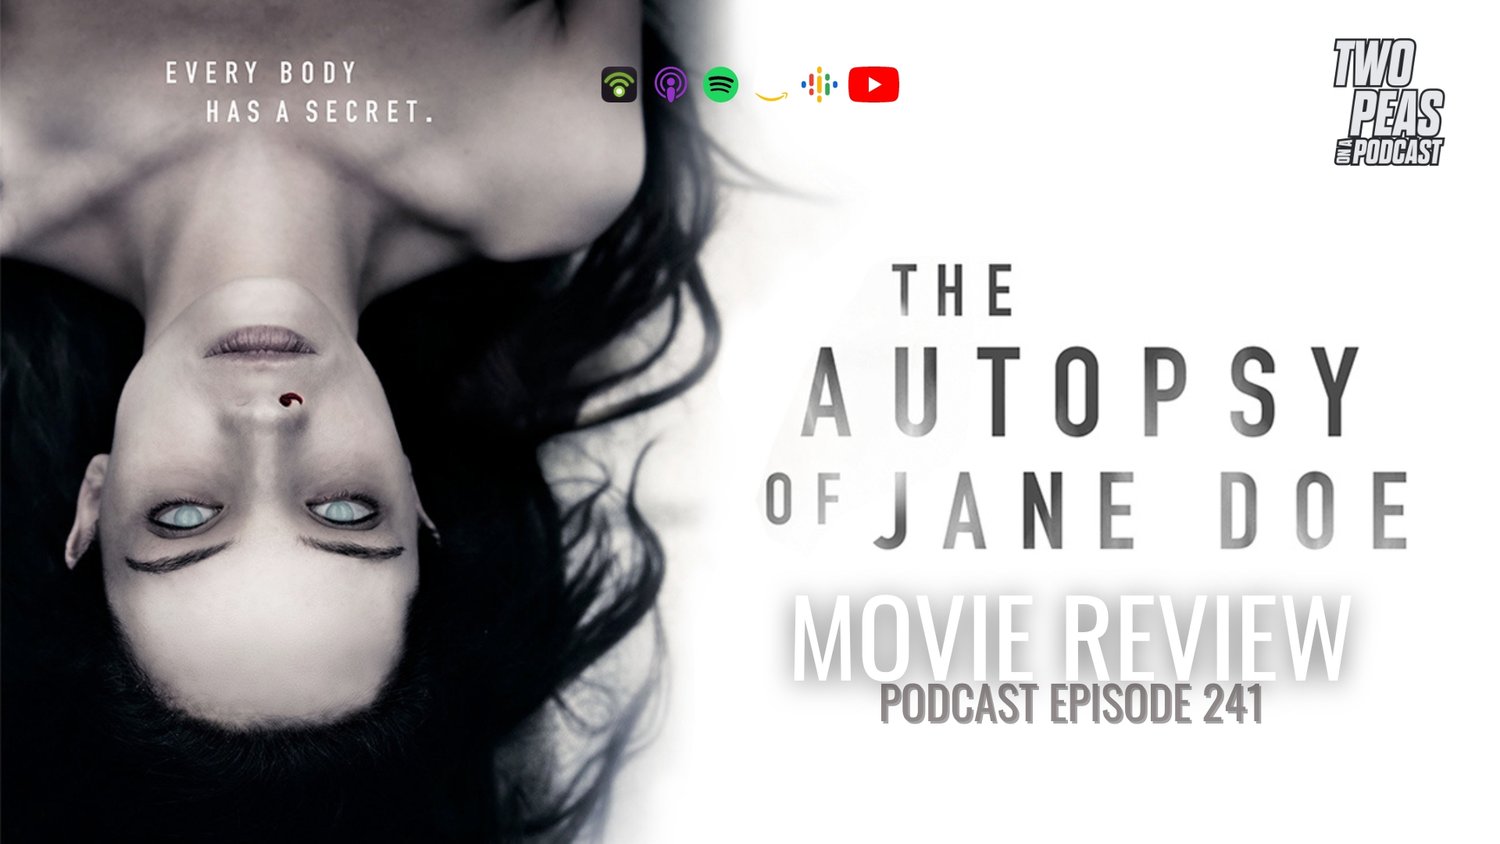 THE AUTOPSY OF JANE DOE Movie Review (241)